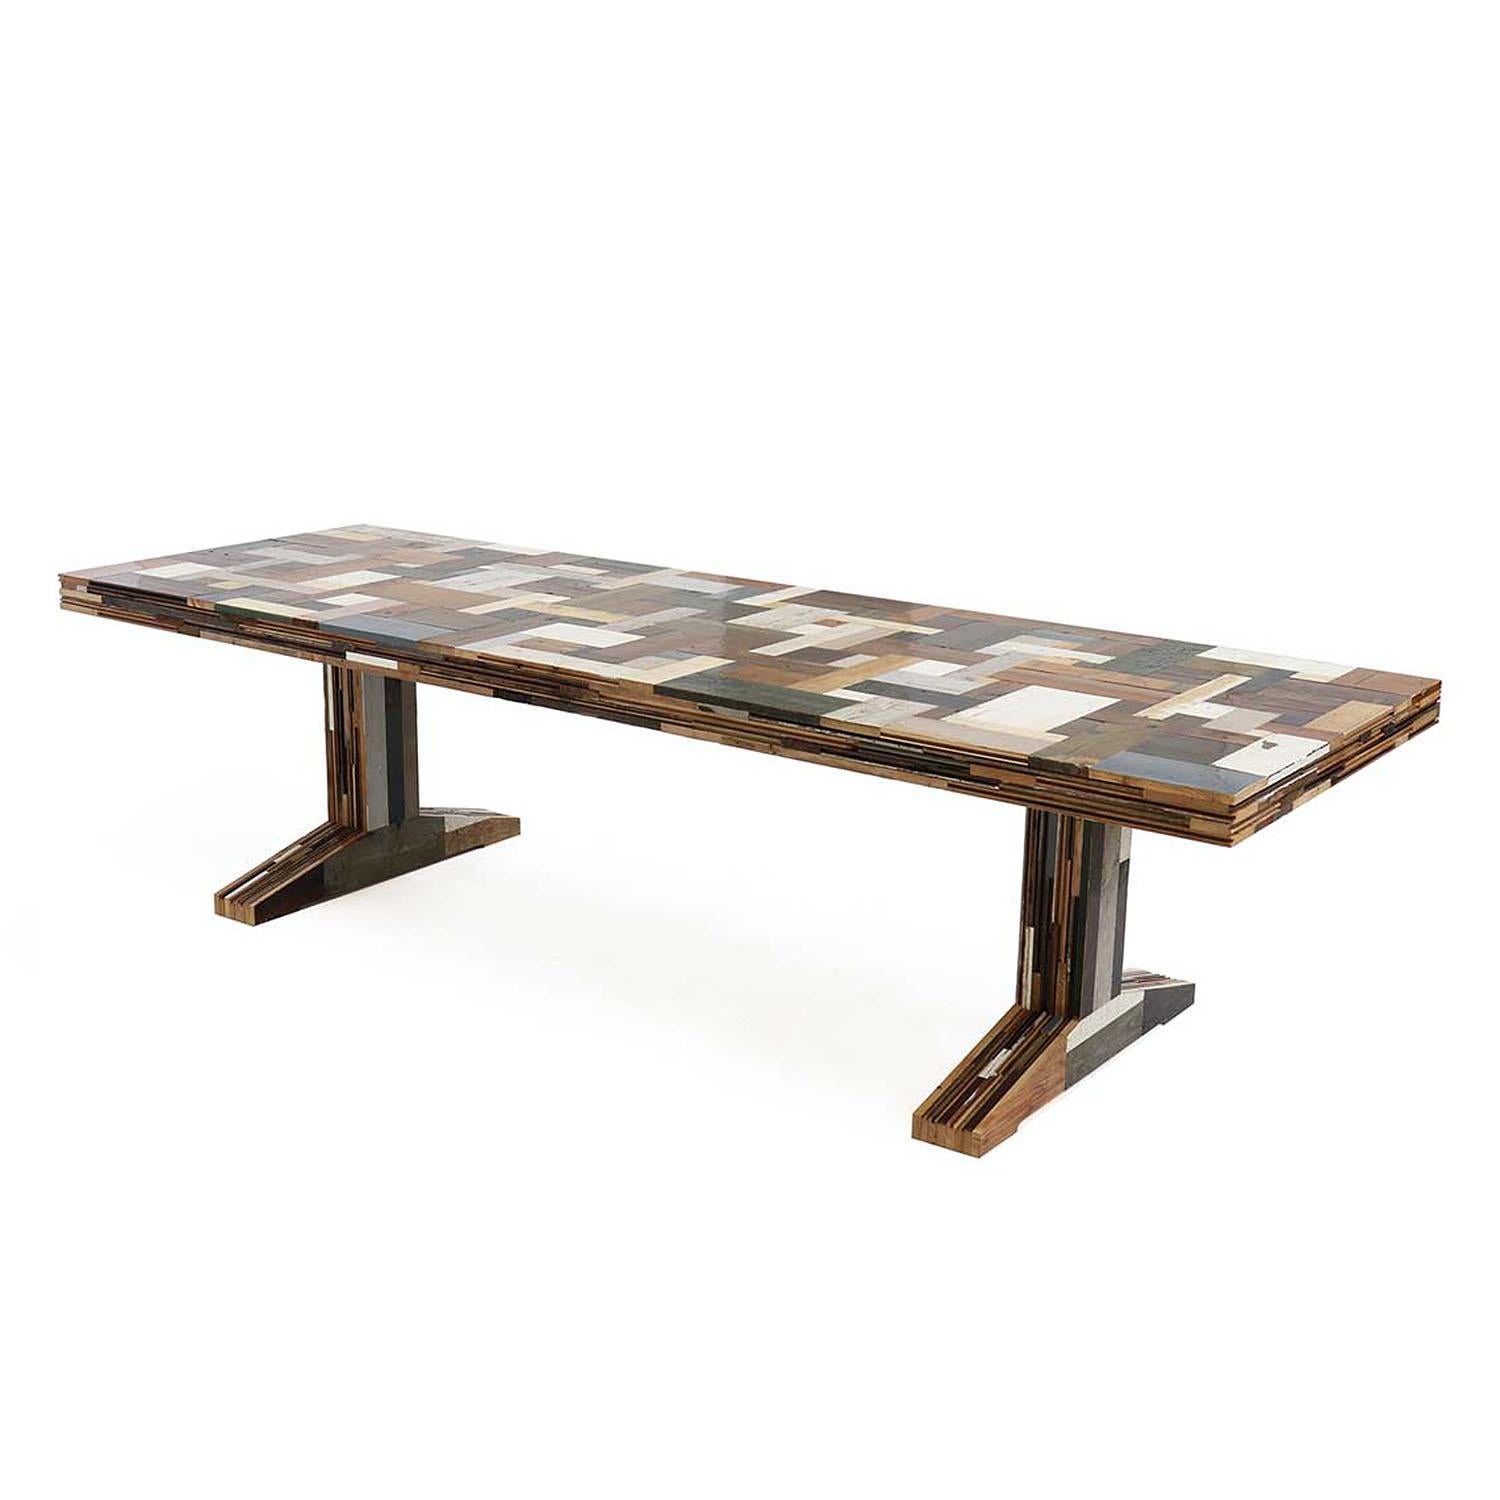 Modern Wooden Dining Table, Waste Table in Scrapwood by Piet Hein Eek In New Condition For Sale In Warsaw, PL